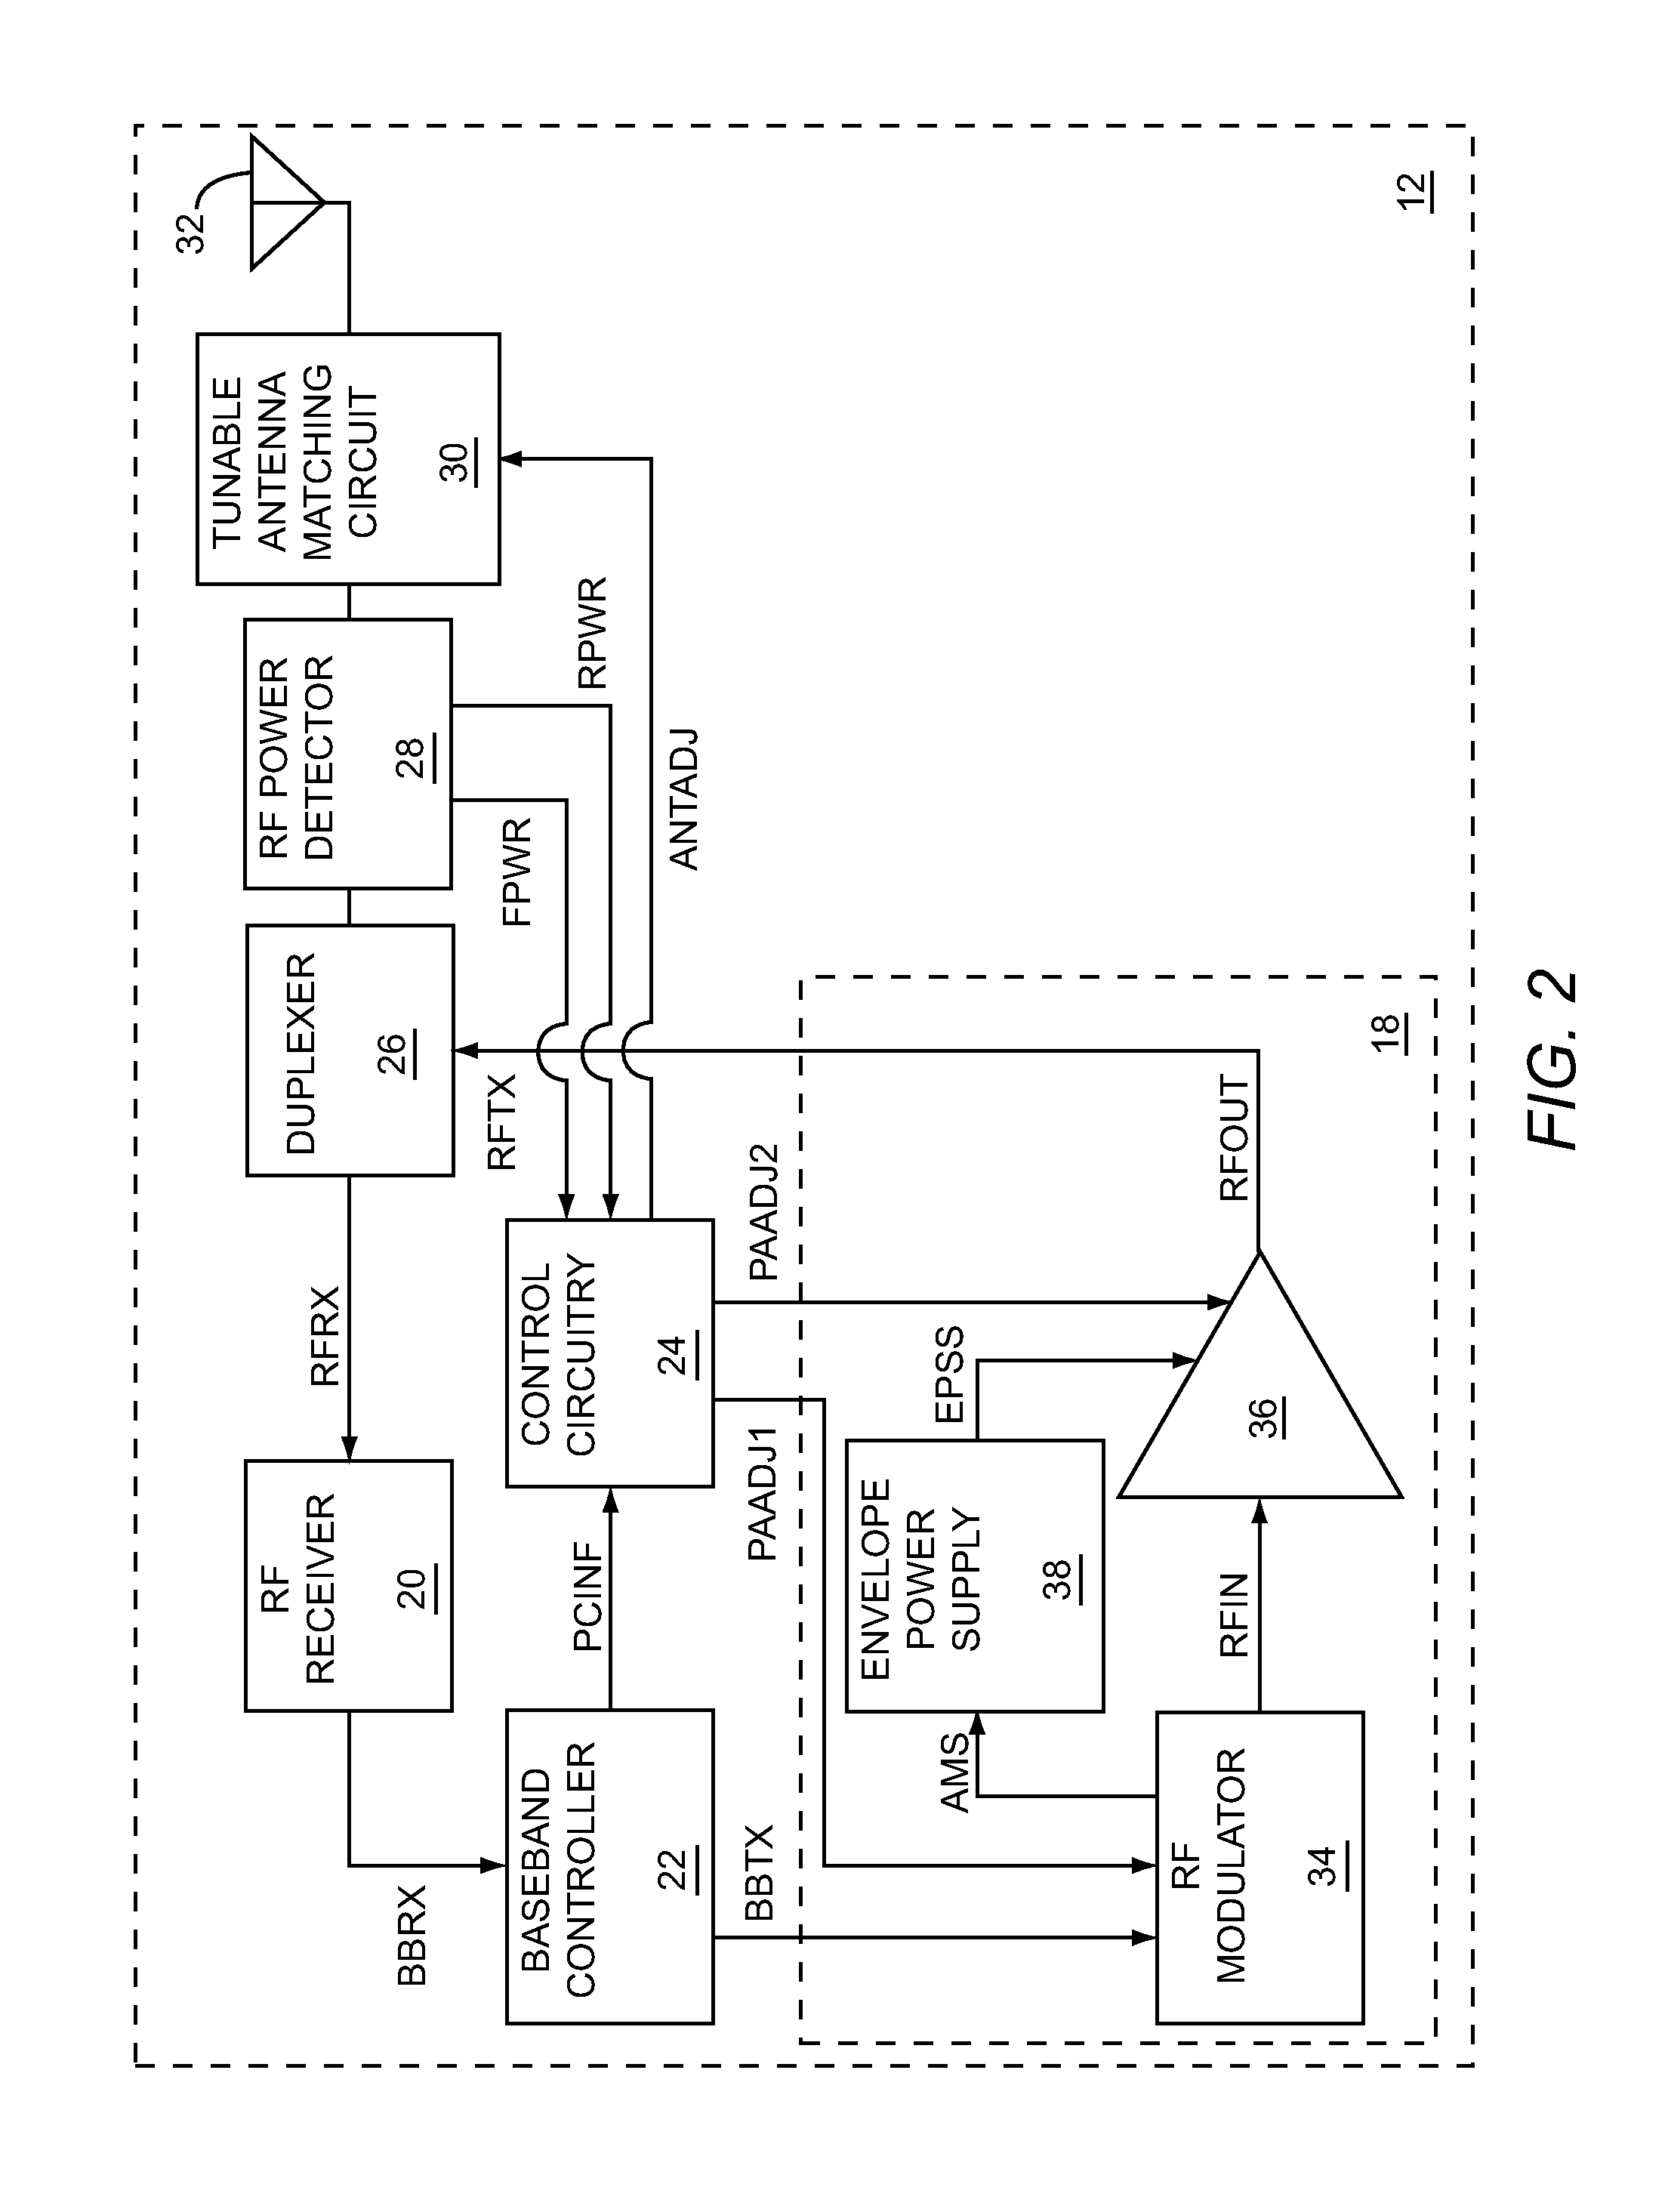 Power control loop using a tunable antenna matching circuit